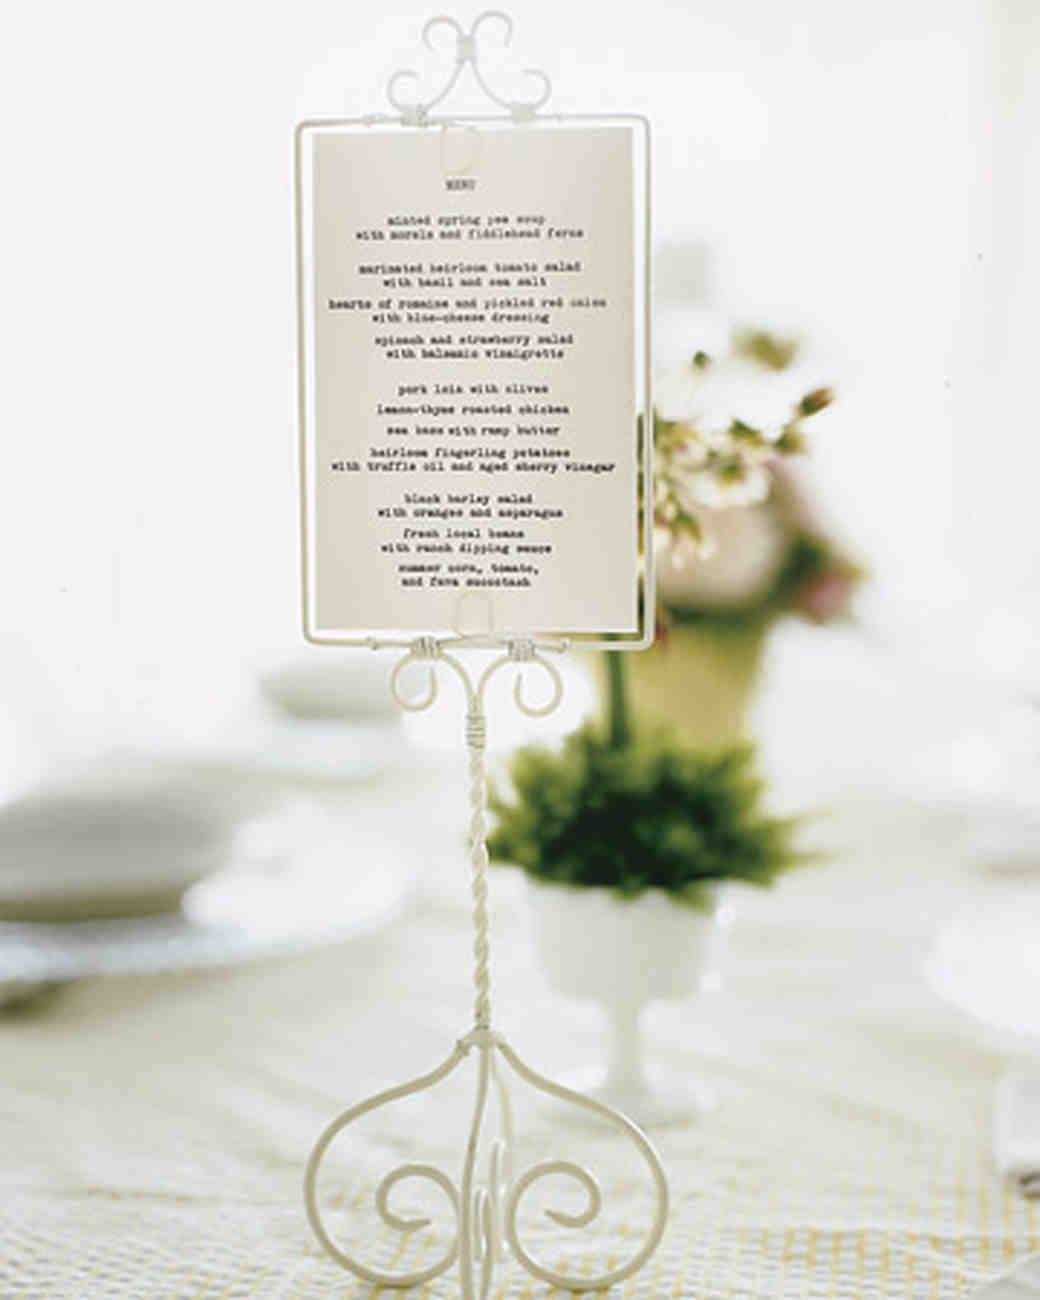 Get inspired to try something different with this collection of untraditional menus and menu card displays